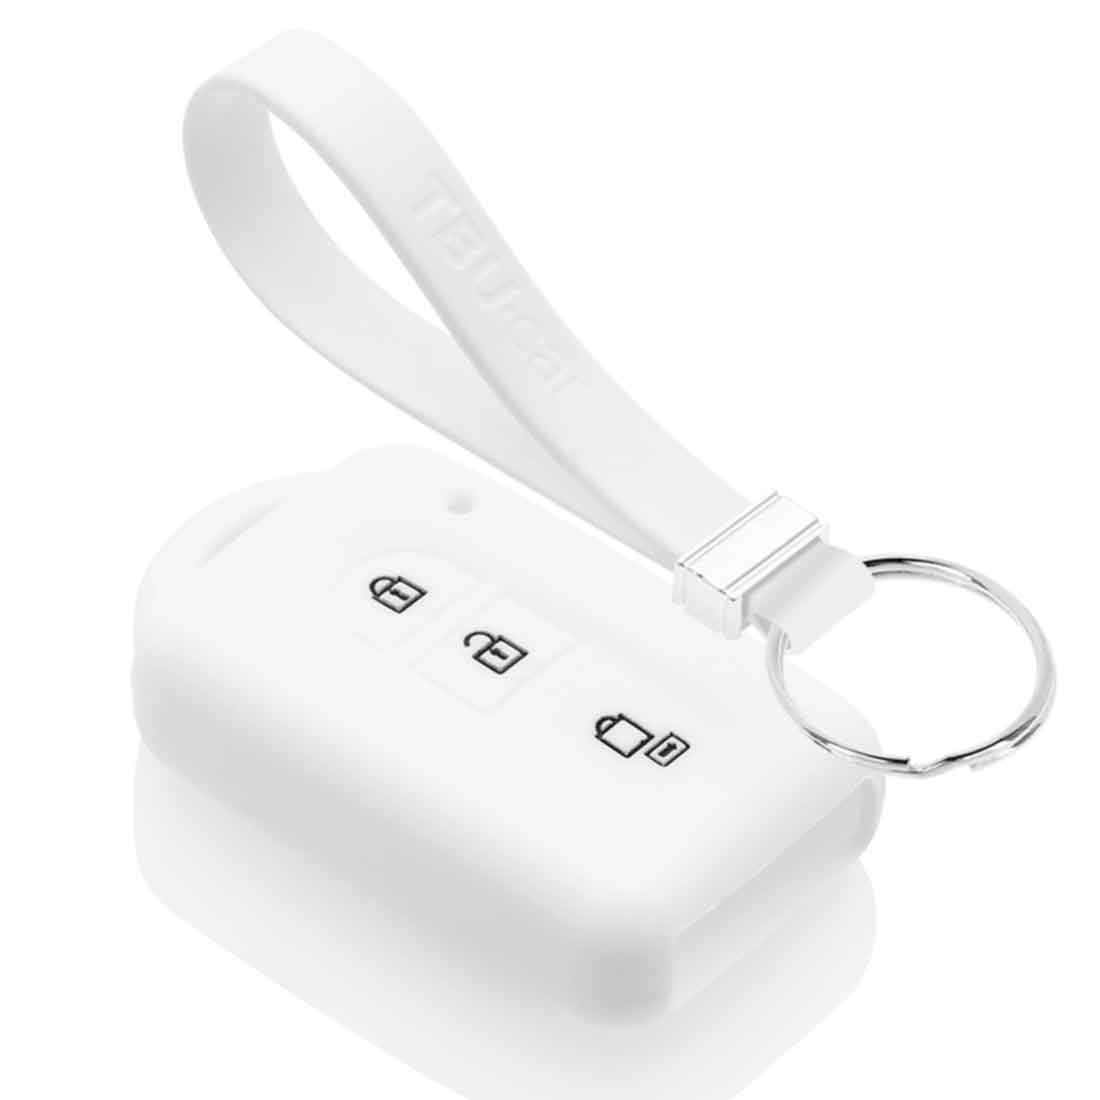 TBU car TBU car Car key cover compatible with Nissan - Silicone Protective Remote Key Shell - FOB Case Cover - White